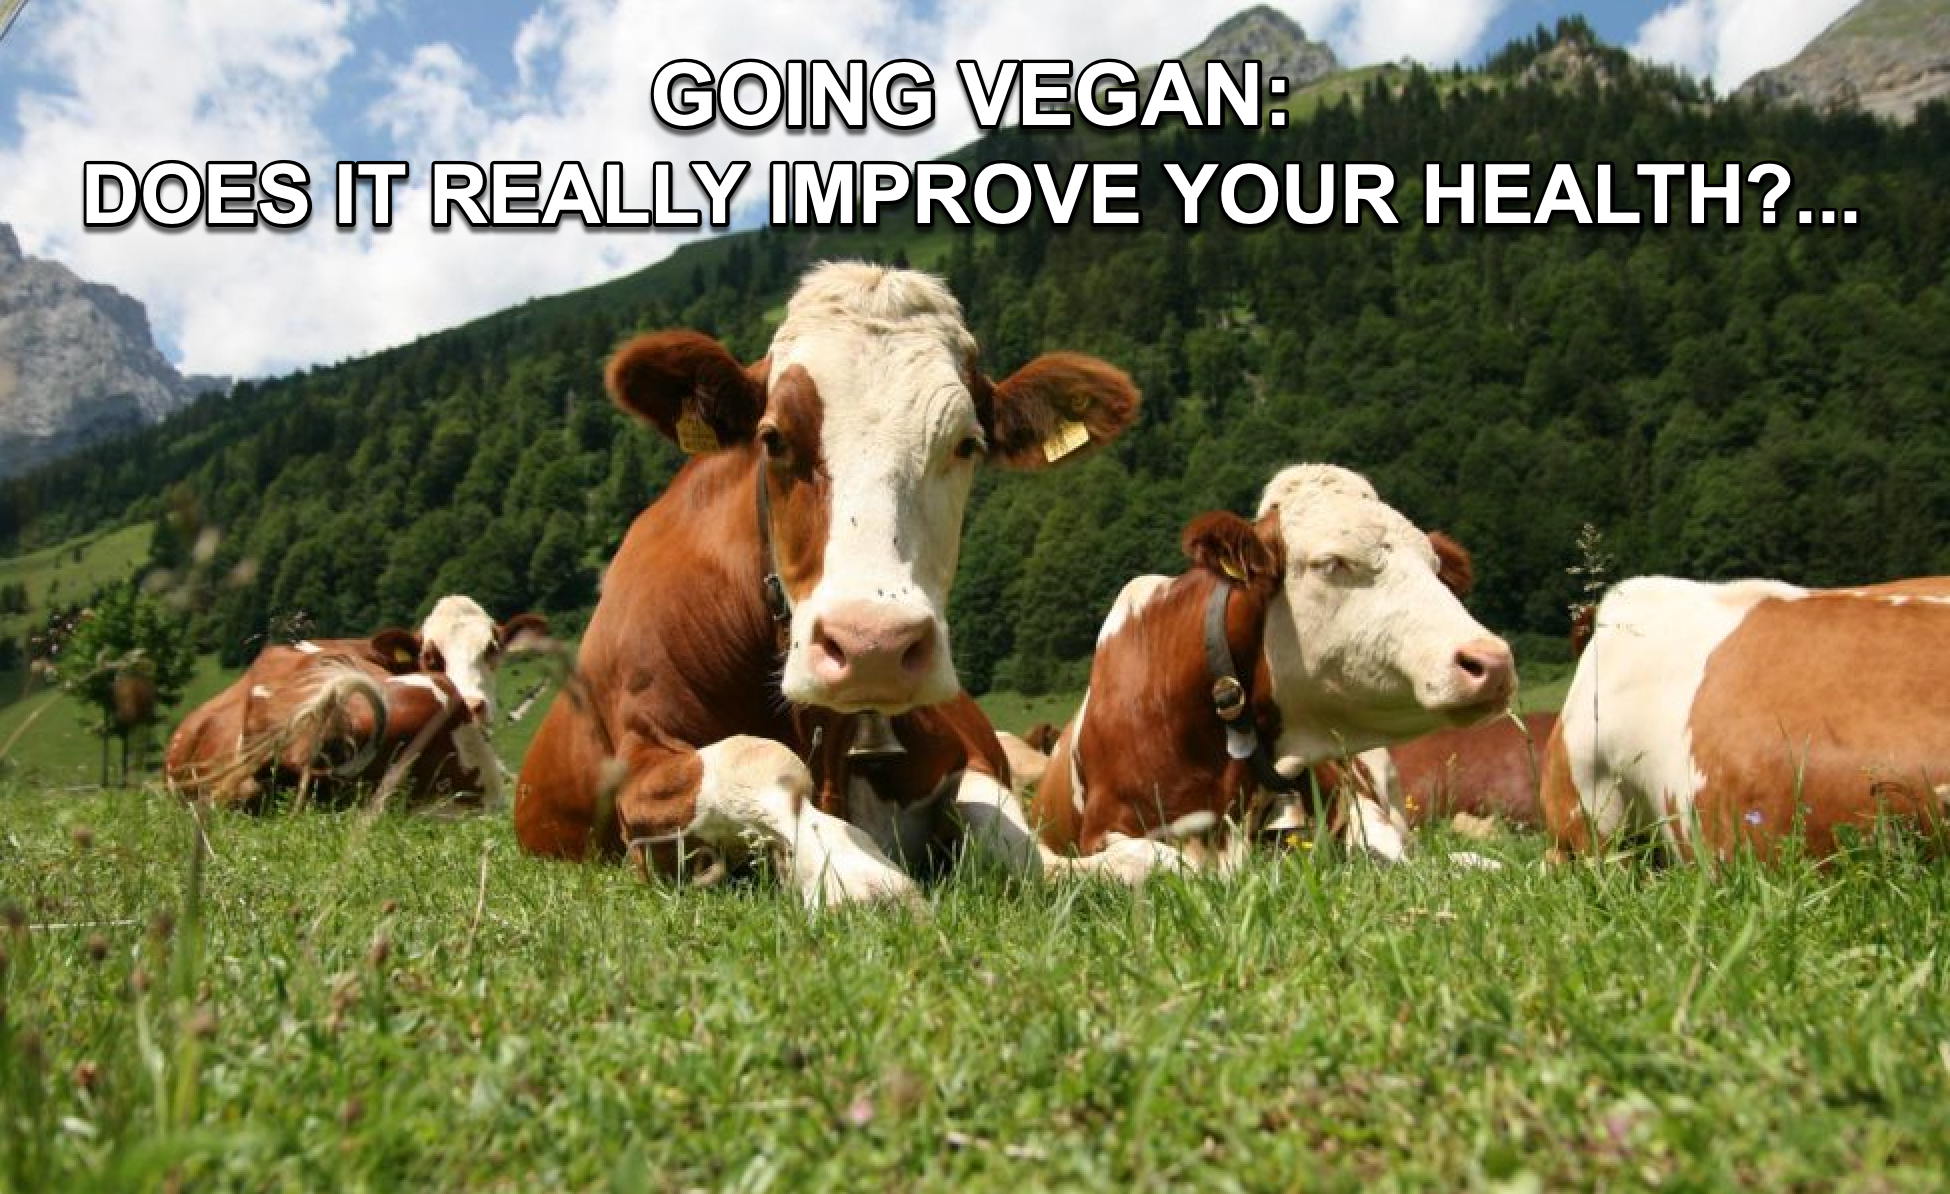   GOING VEGAN: DOES IT REALLY IMPROVE YOUR HEALTH?